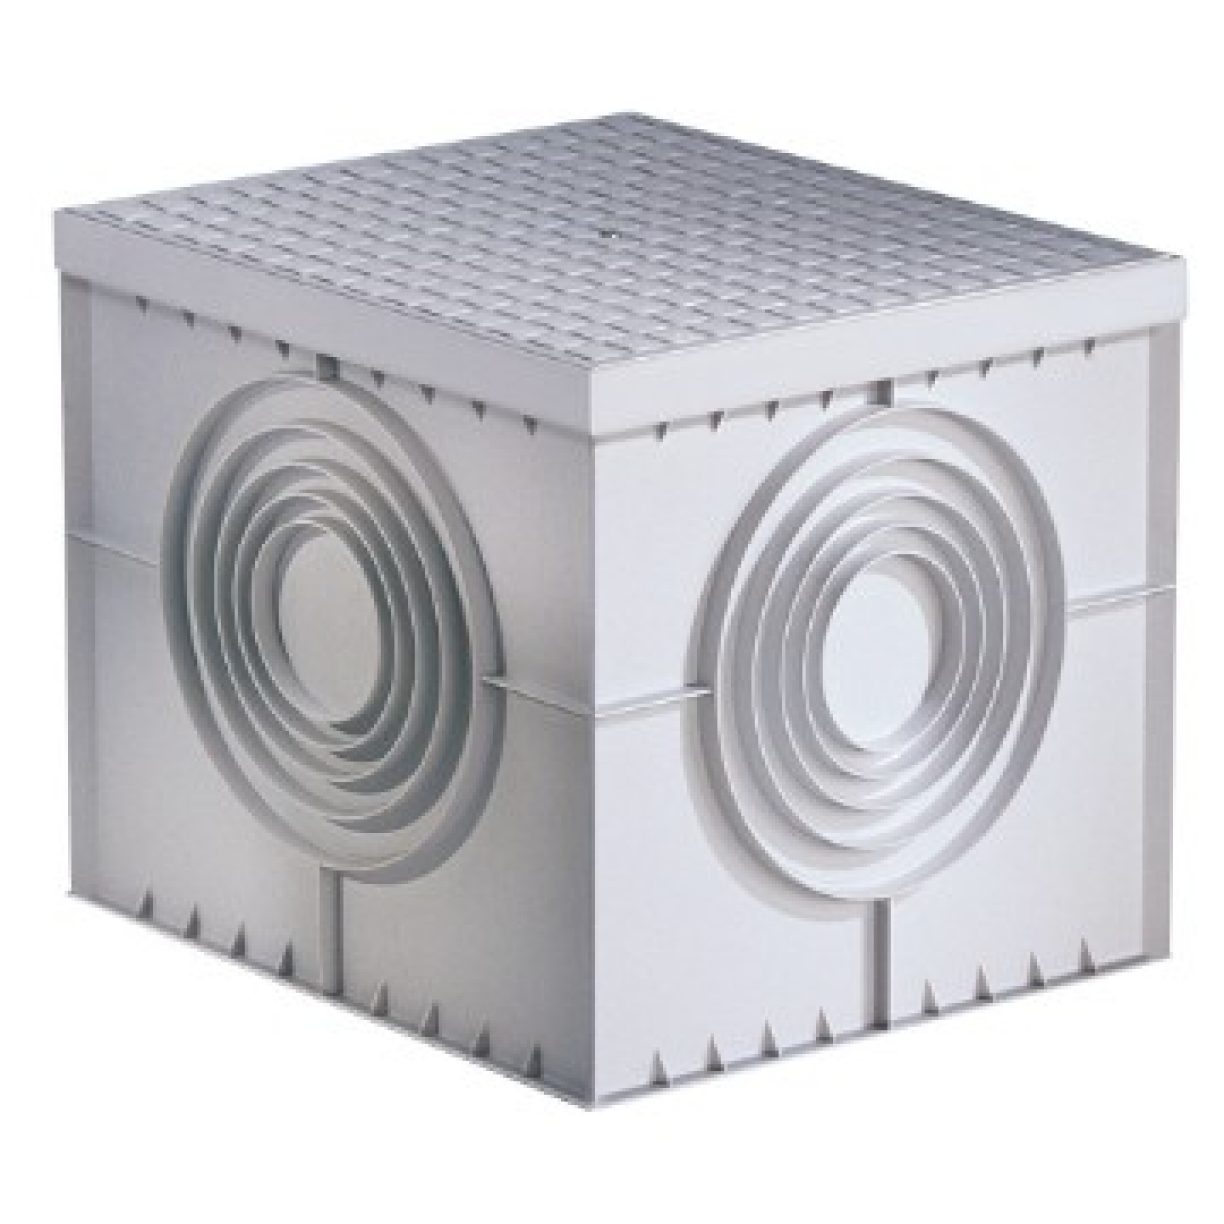 SQUARE ACCES CHAMBER 550X550X520 - FLAT KNOCKOUT BASE AND HIGH 